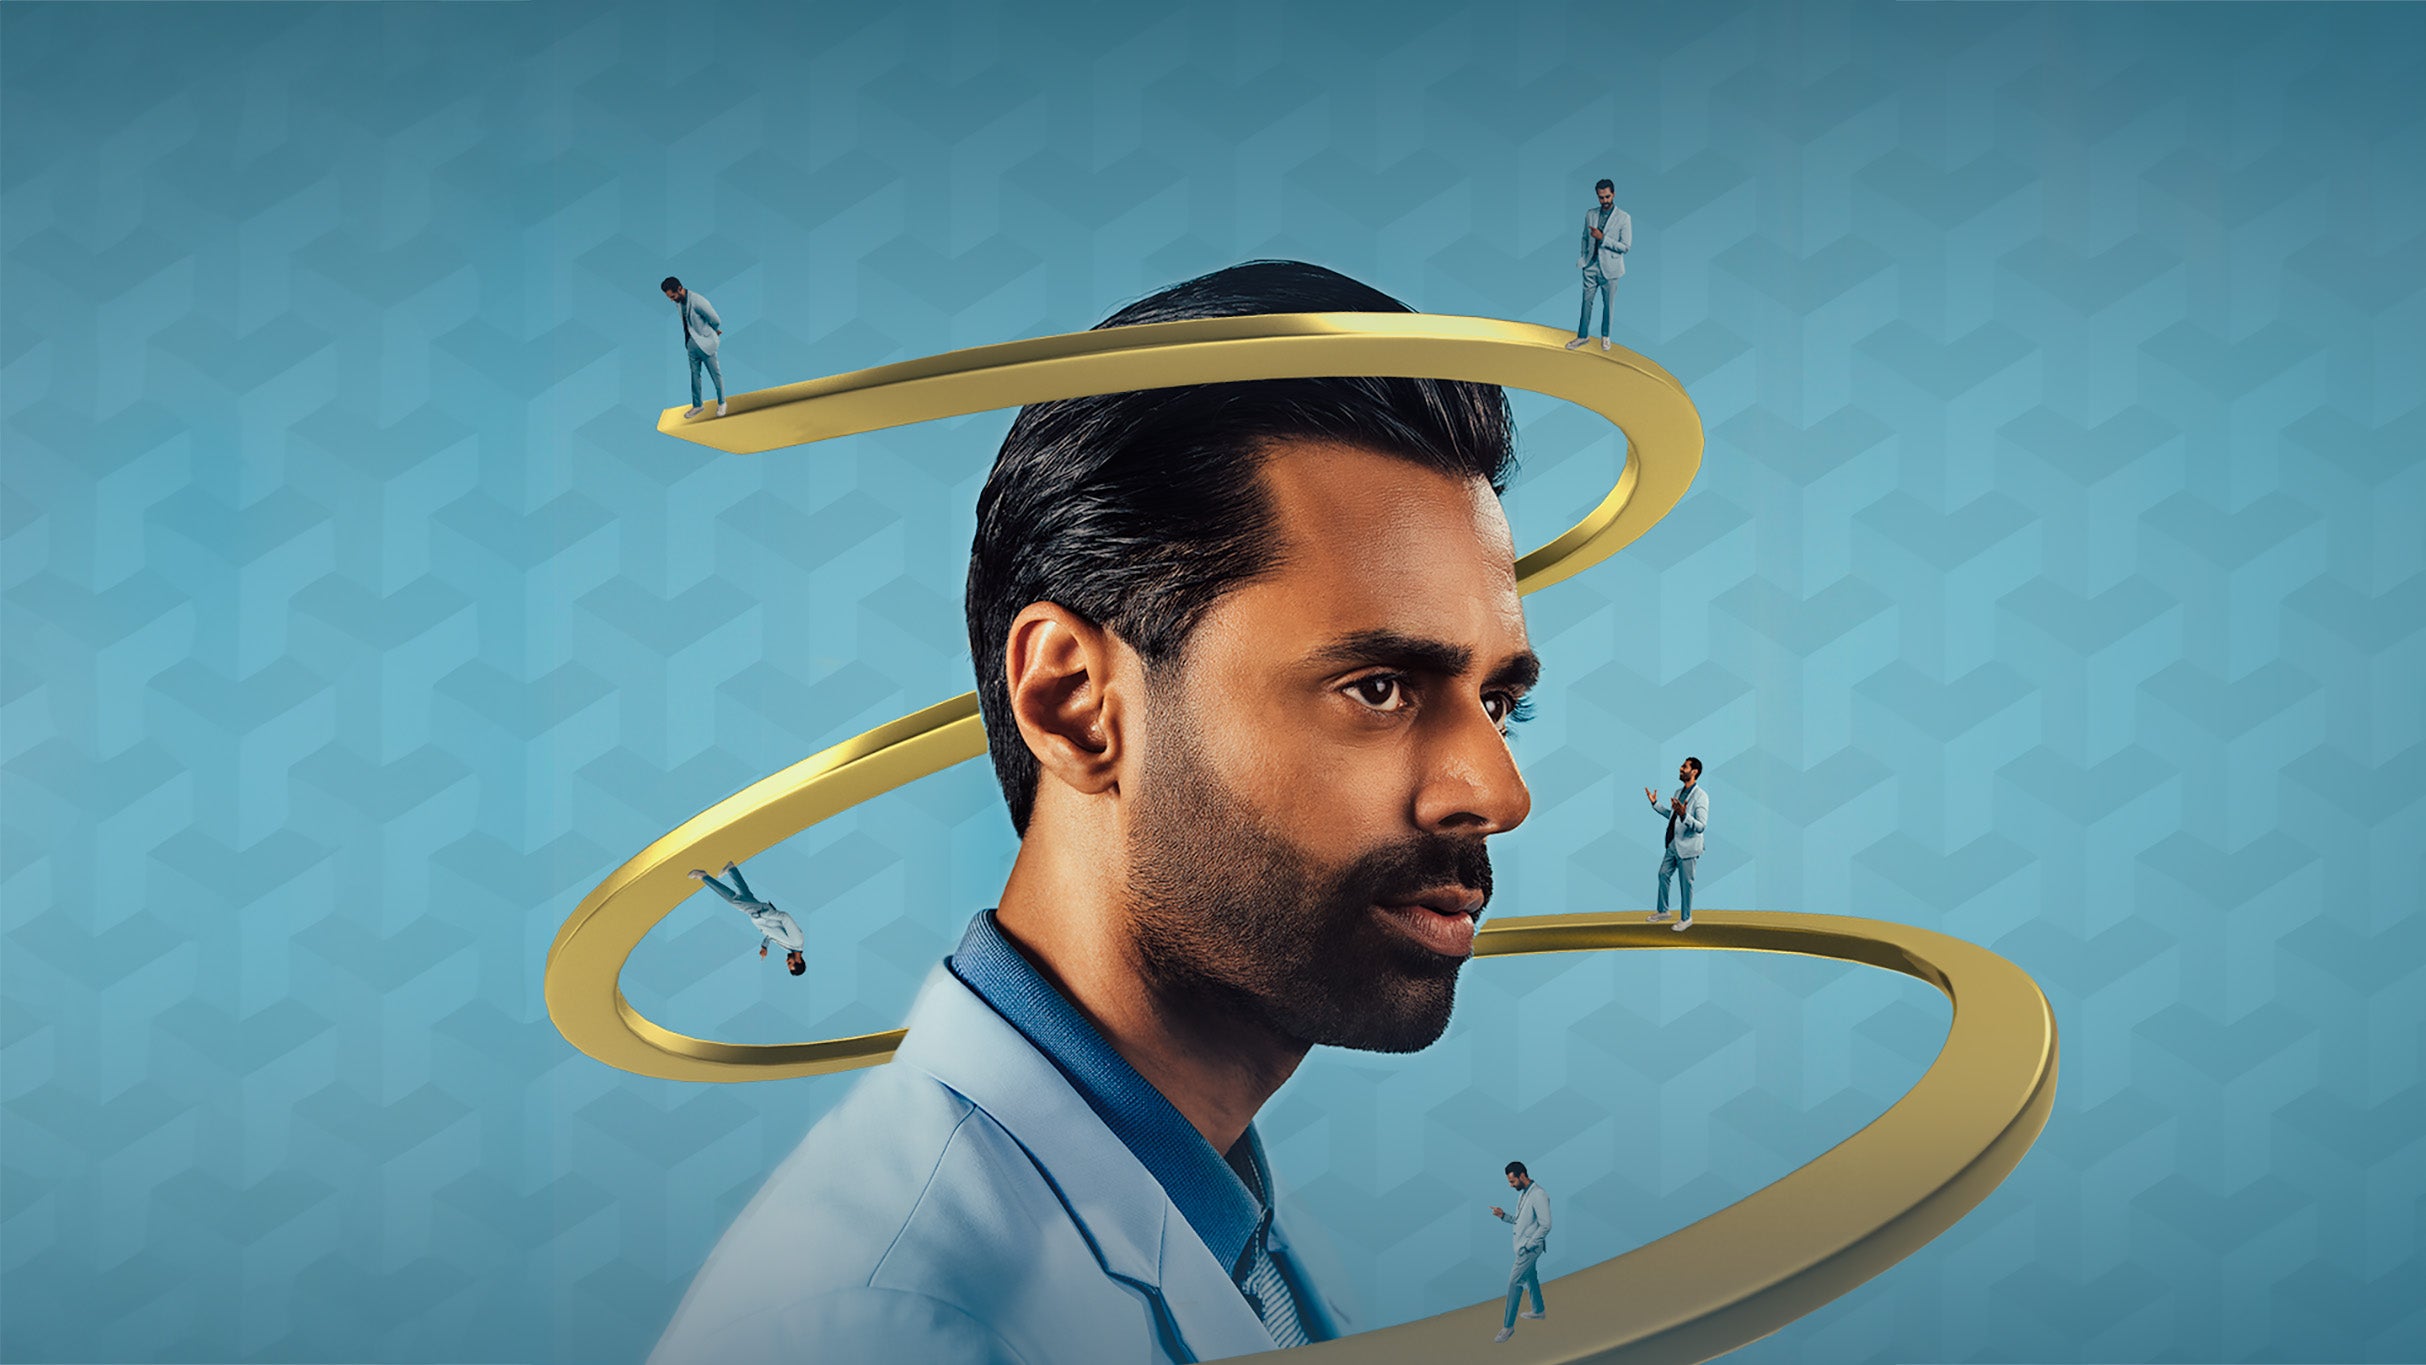 Hasan Minhaj: Off With His Head free presale pa55w0rd for early tickets in San Francisco